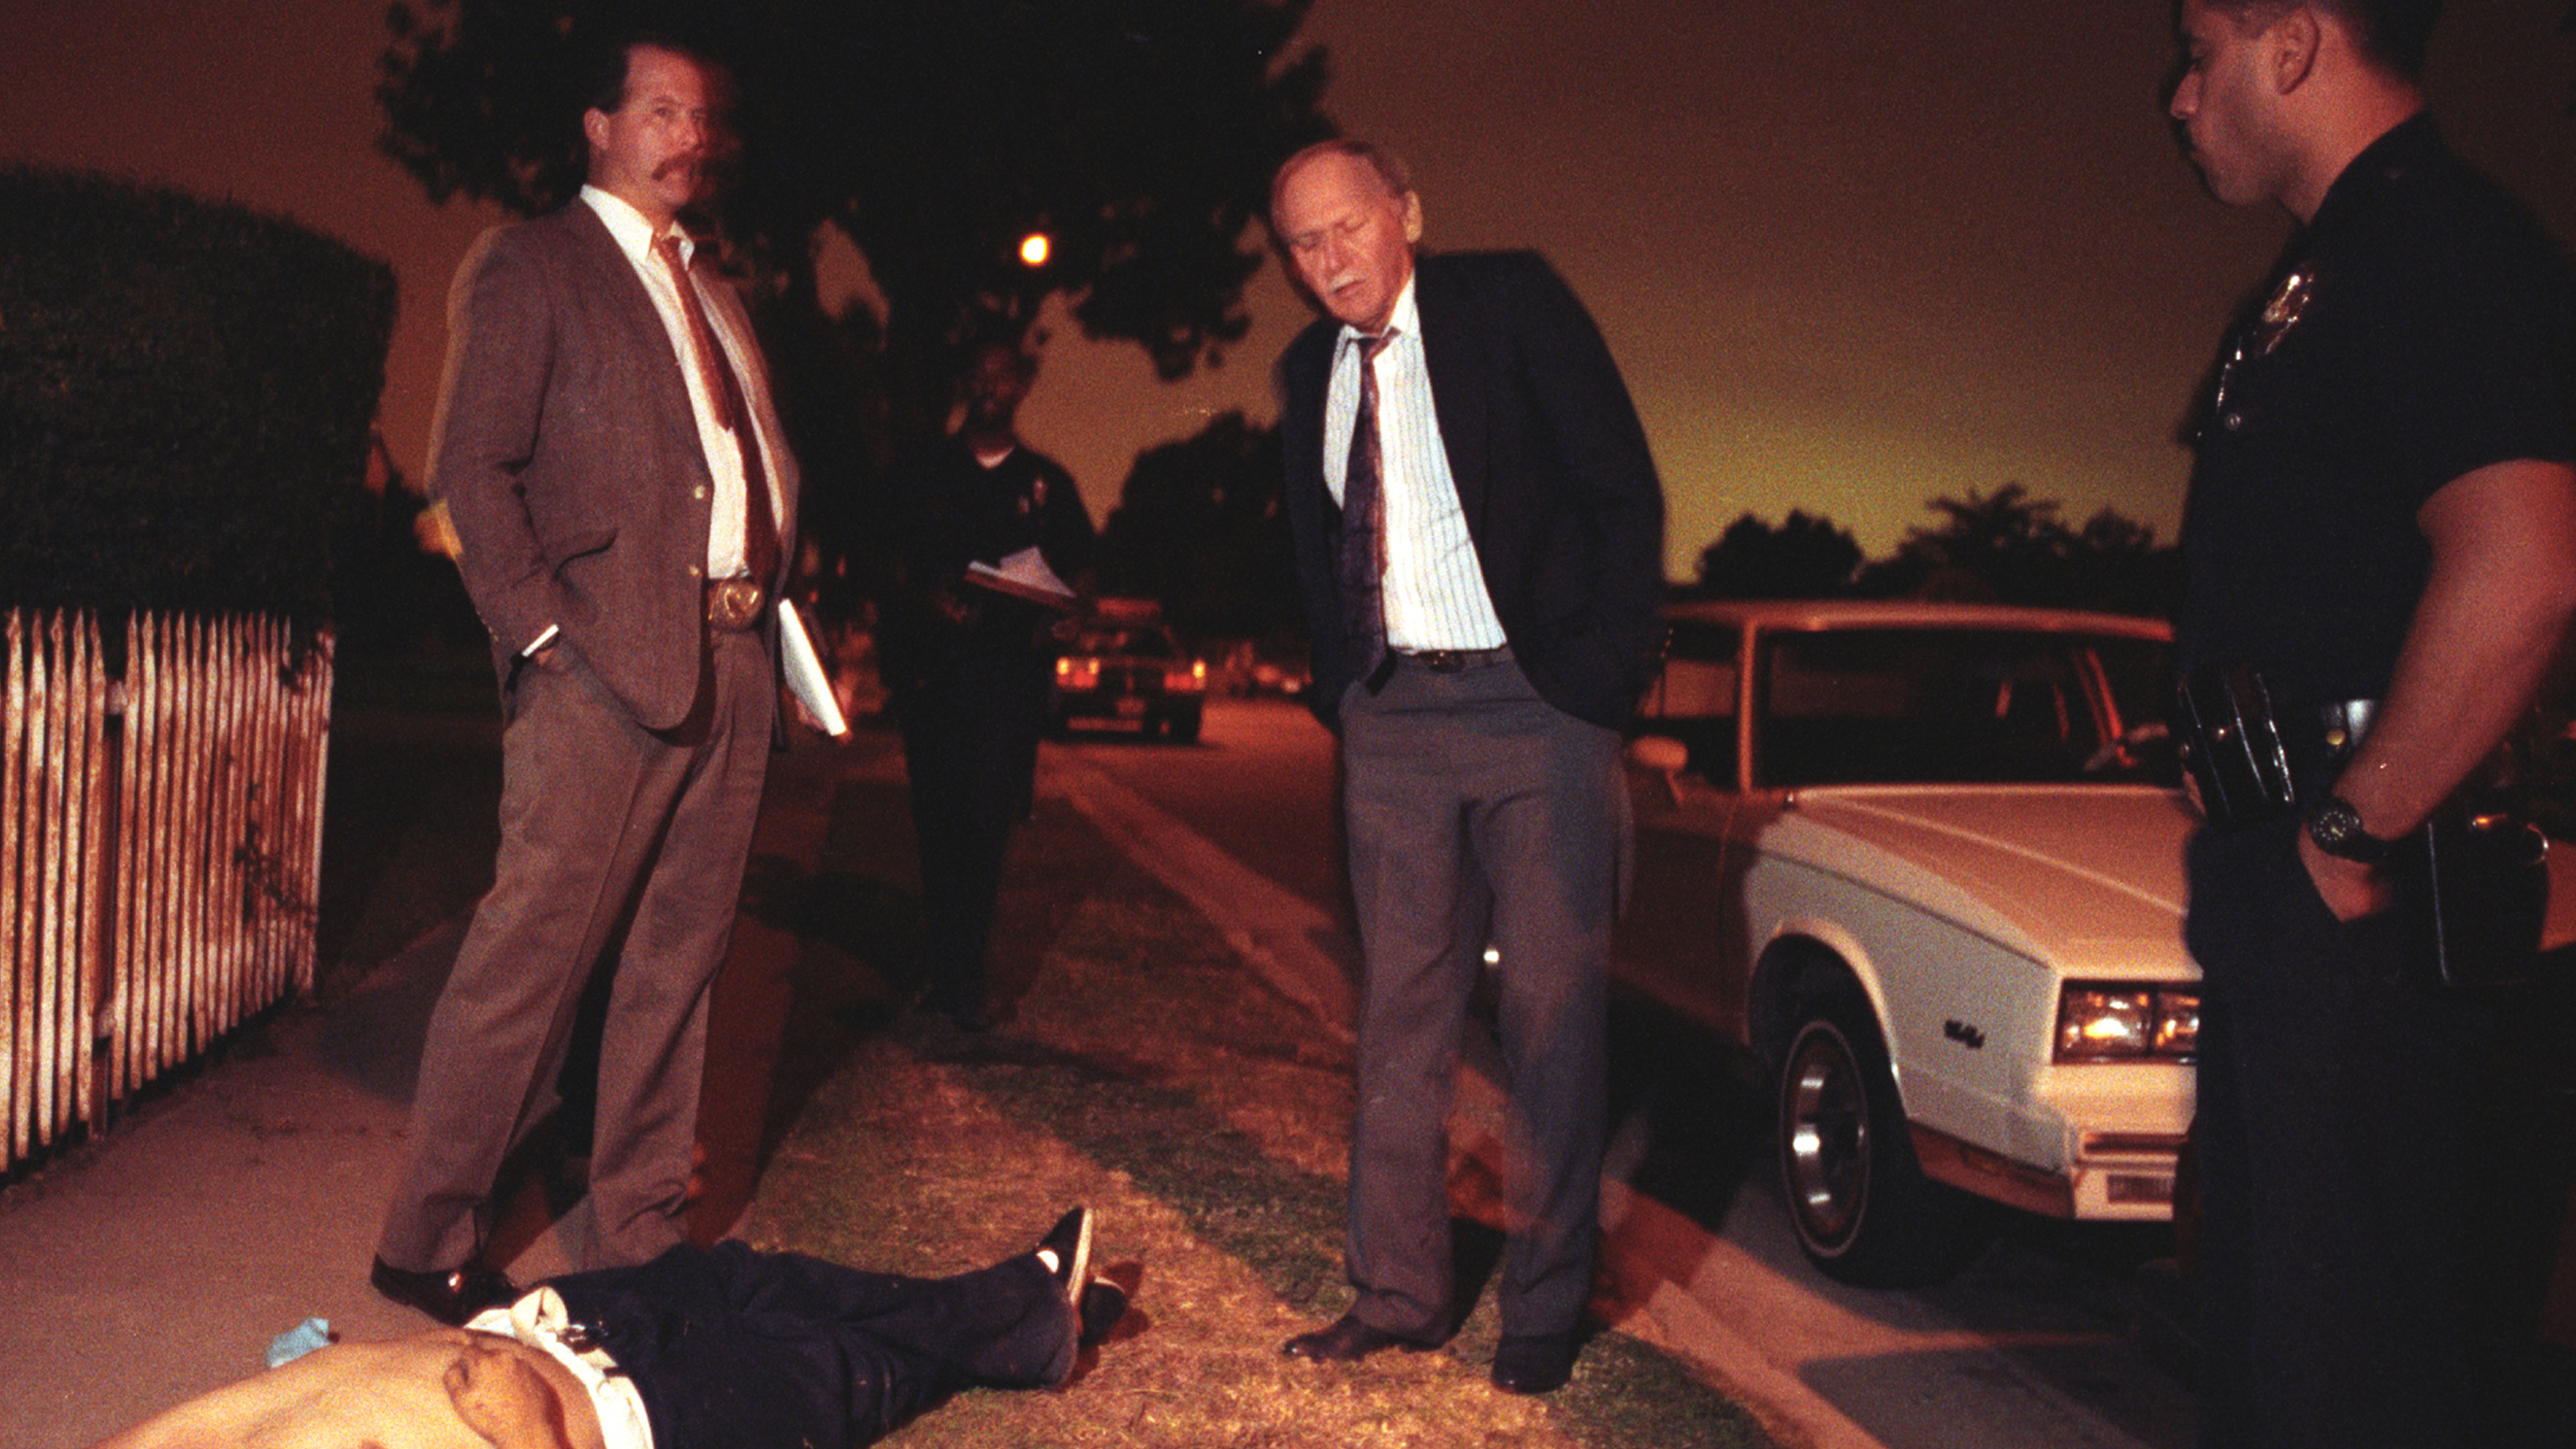 What Makes a Good Homicide Investigator?